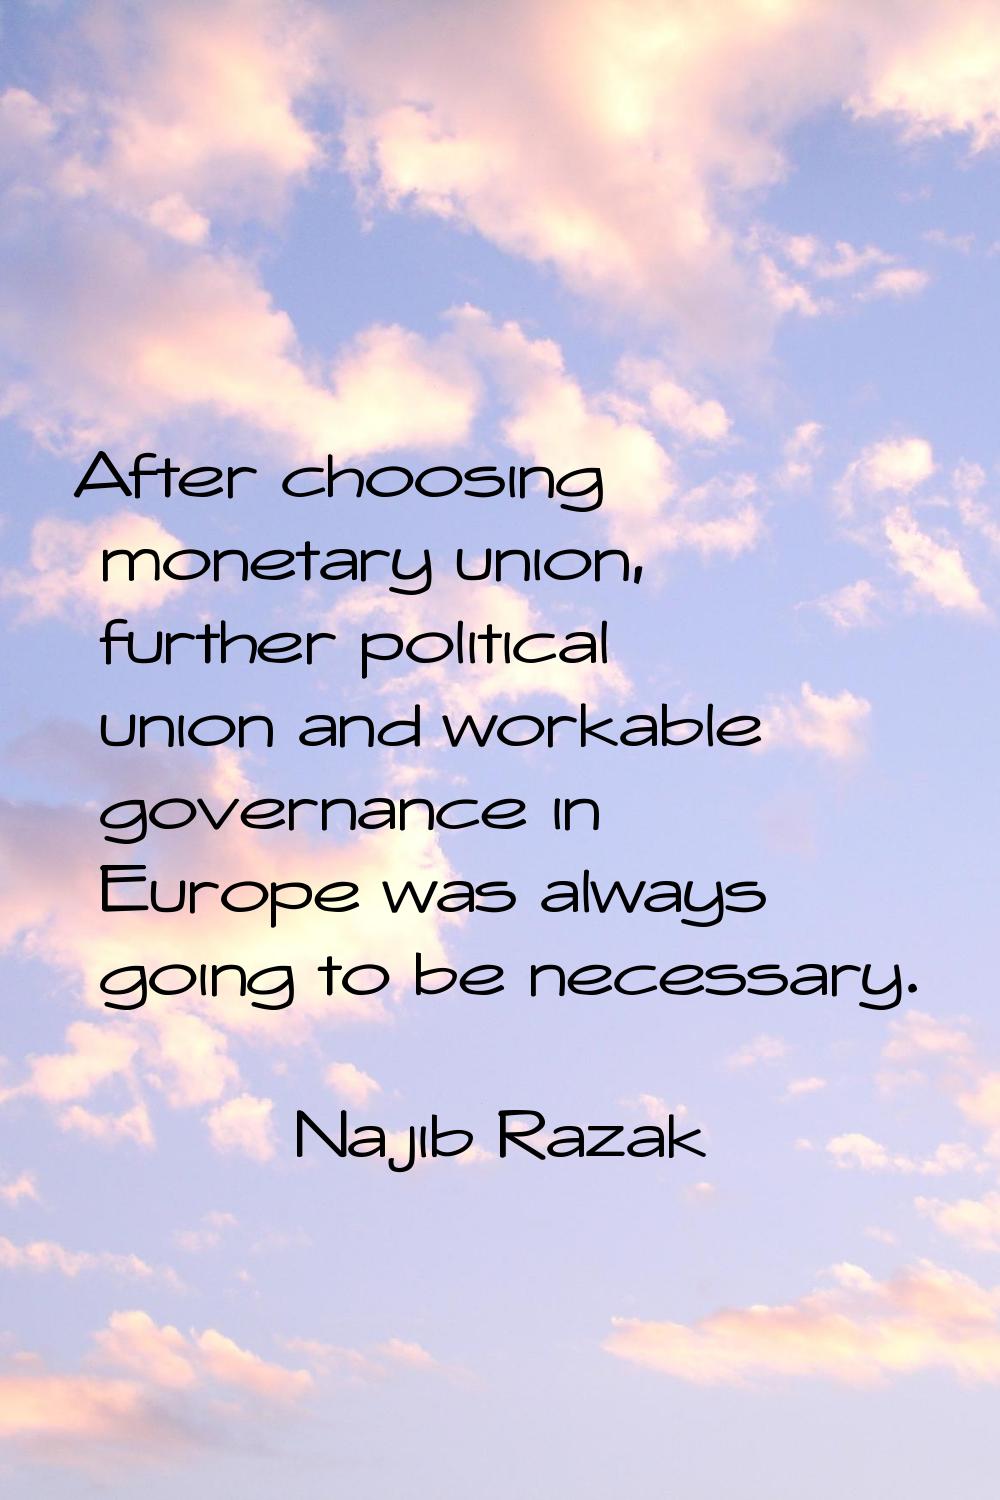 After choosing monetary union, further political union and workable governance in Europe was always